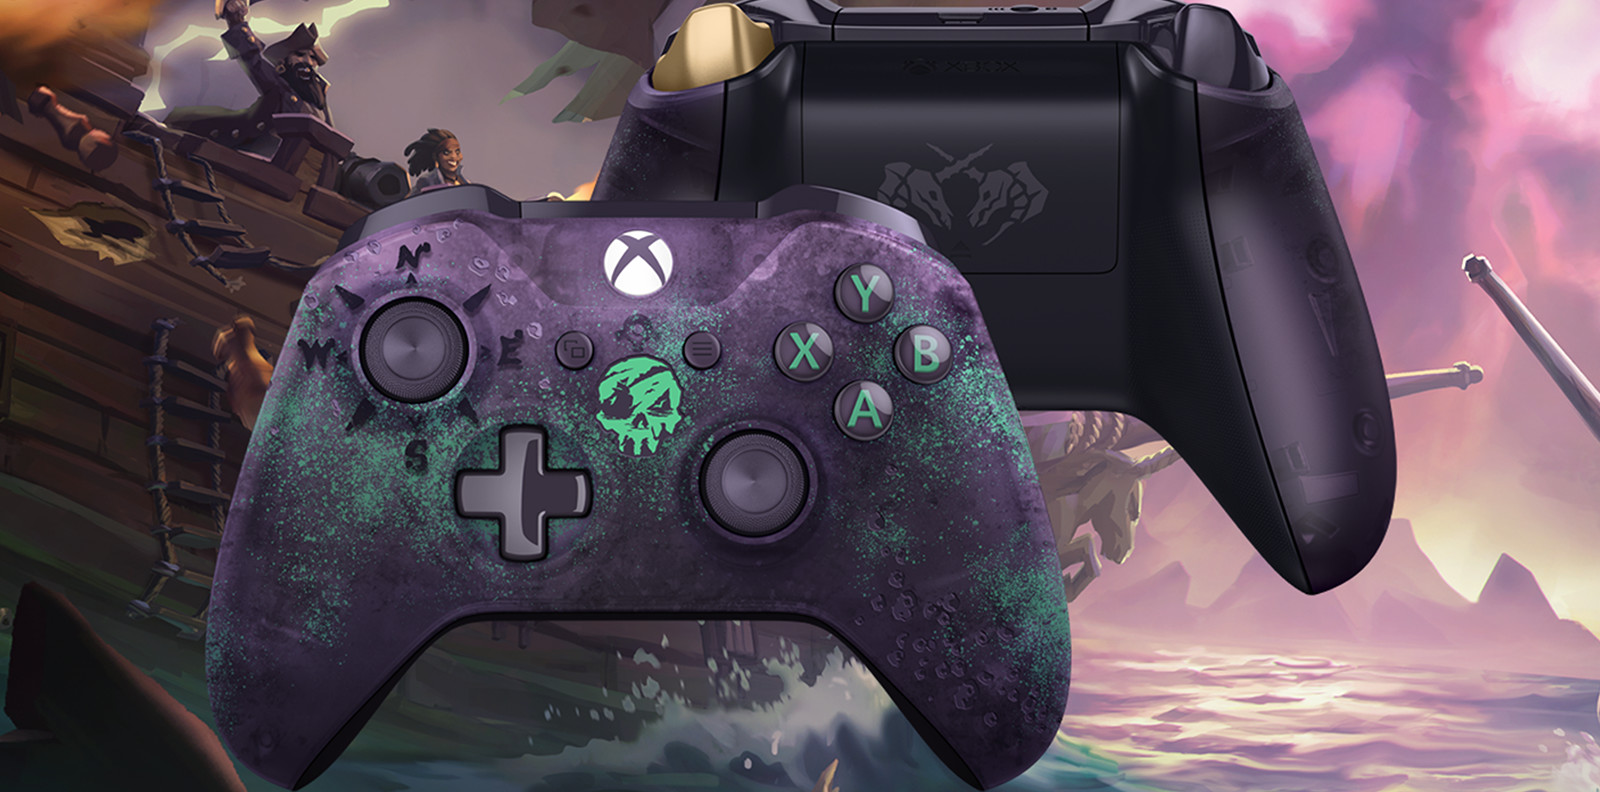 xbox one control sea of thieves